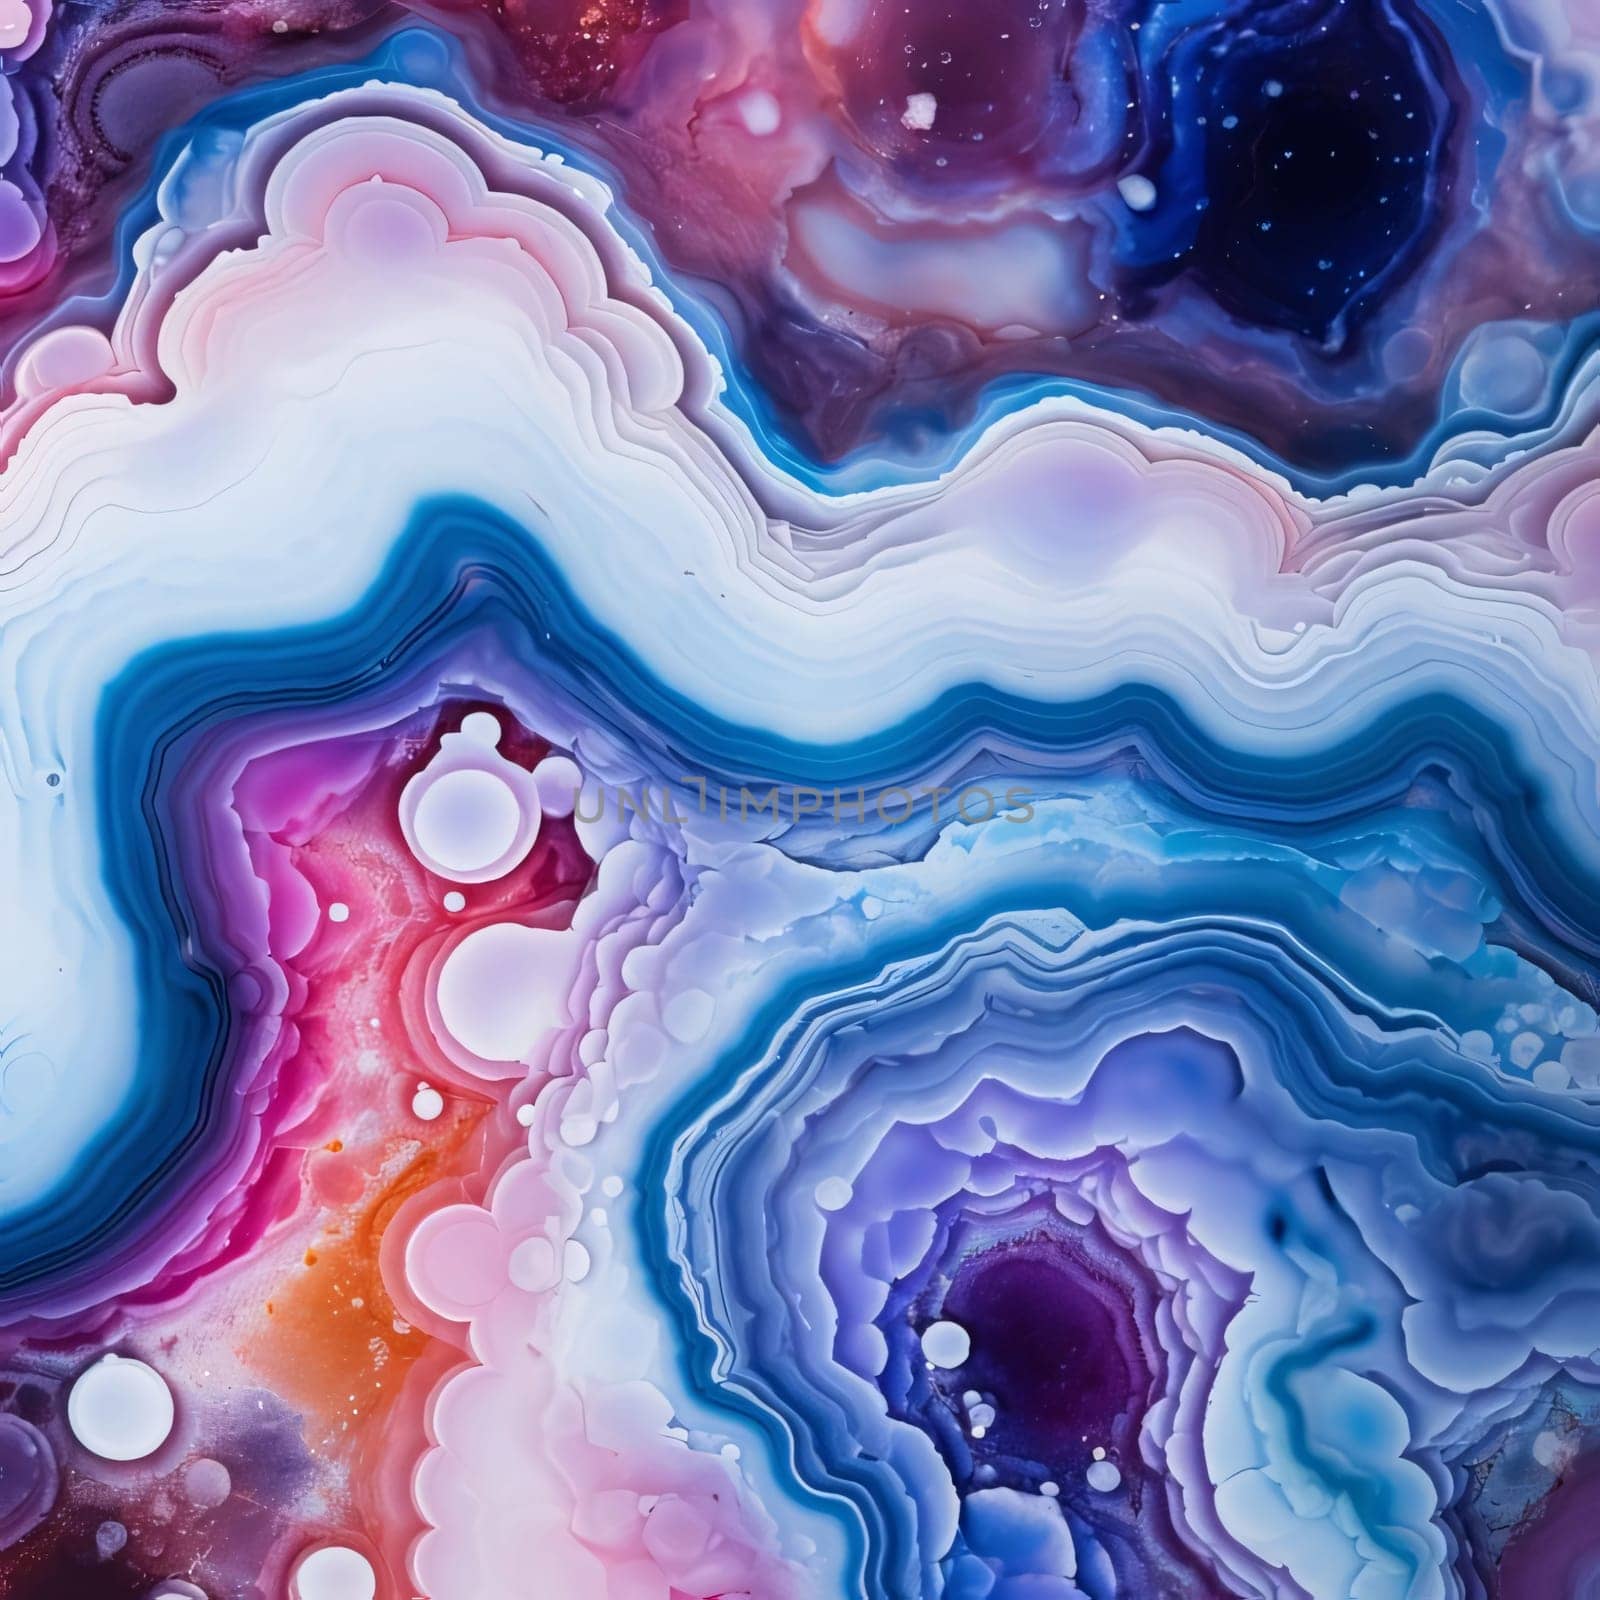 Abstract background design: abstract background with blue and pink agate crystals in the water